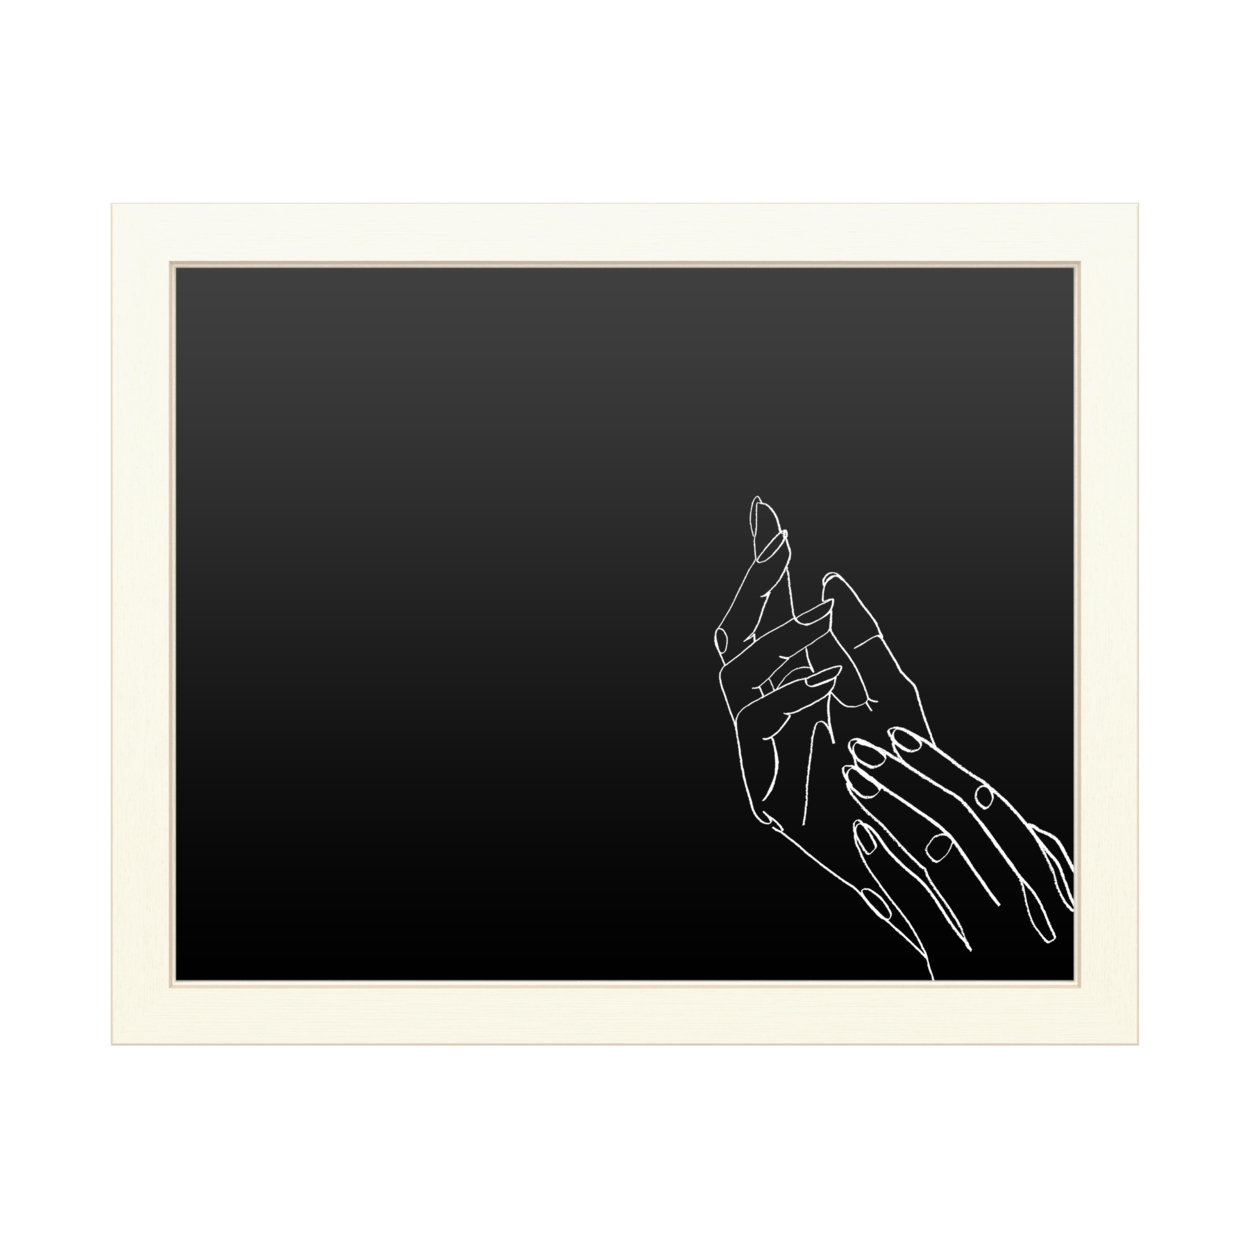 16 X 20 Chalk Board With Printed Artwork - Grace Popp Helping Hands I White Board - Ready To Hang Chalkboard